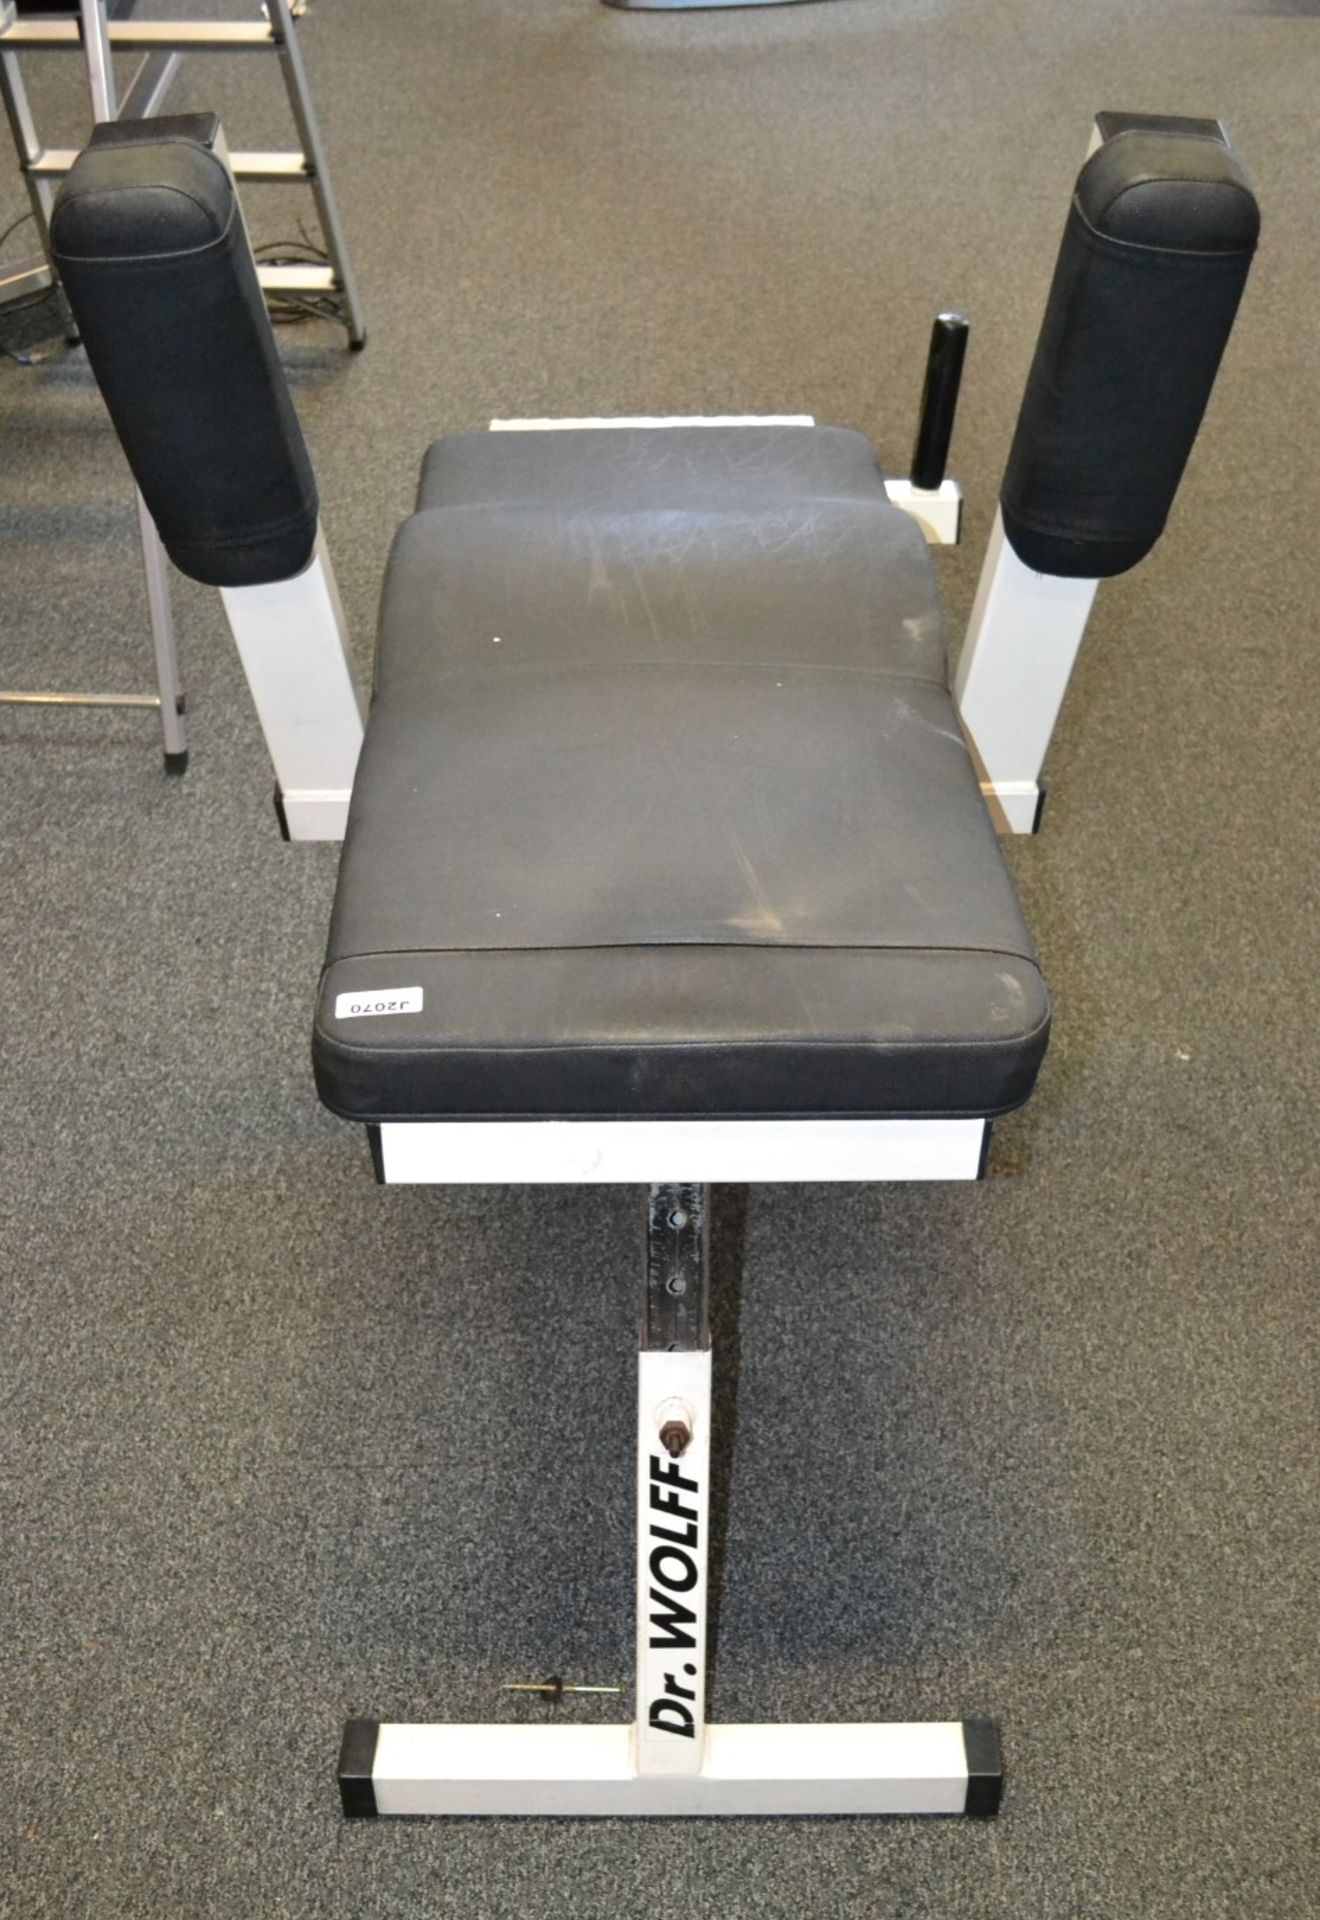 1 x Dr.Wolff Abdominal Fitness Bench - Dimensions: L140 x H100 x W50cm - Ref: J2070/1FG - CL356 - - Image 2 of 3